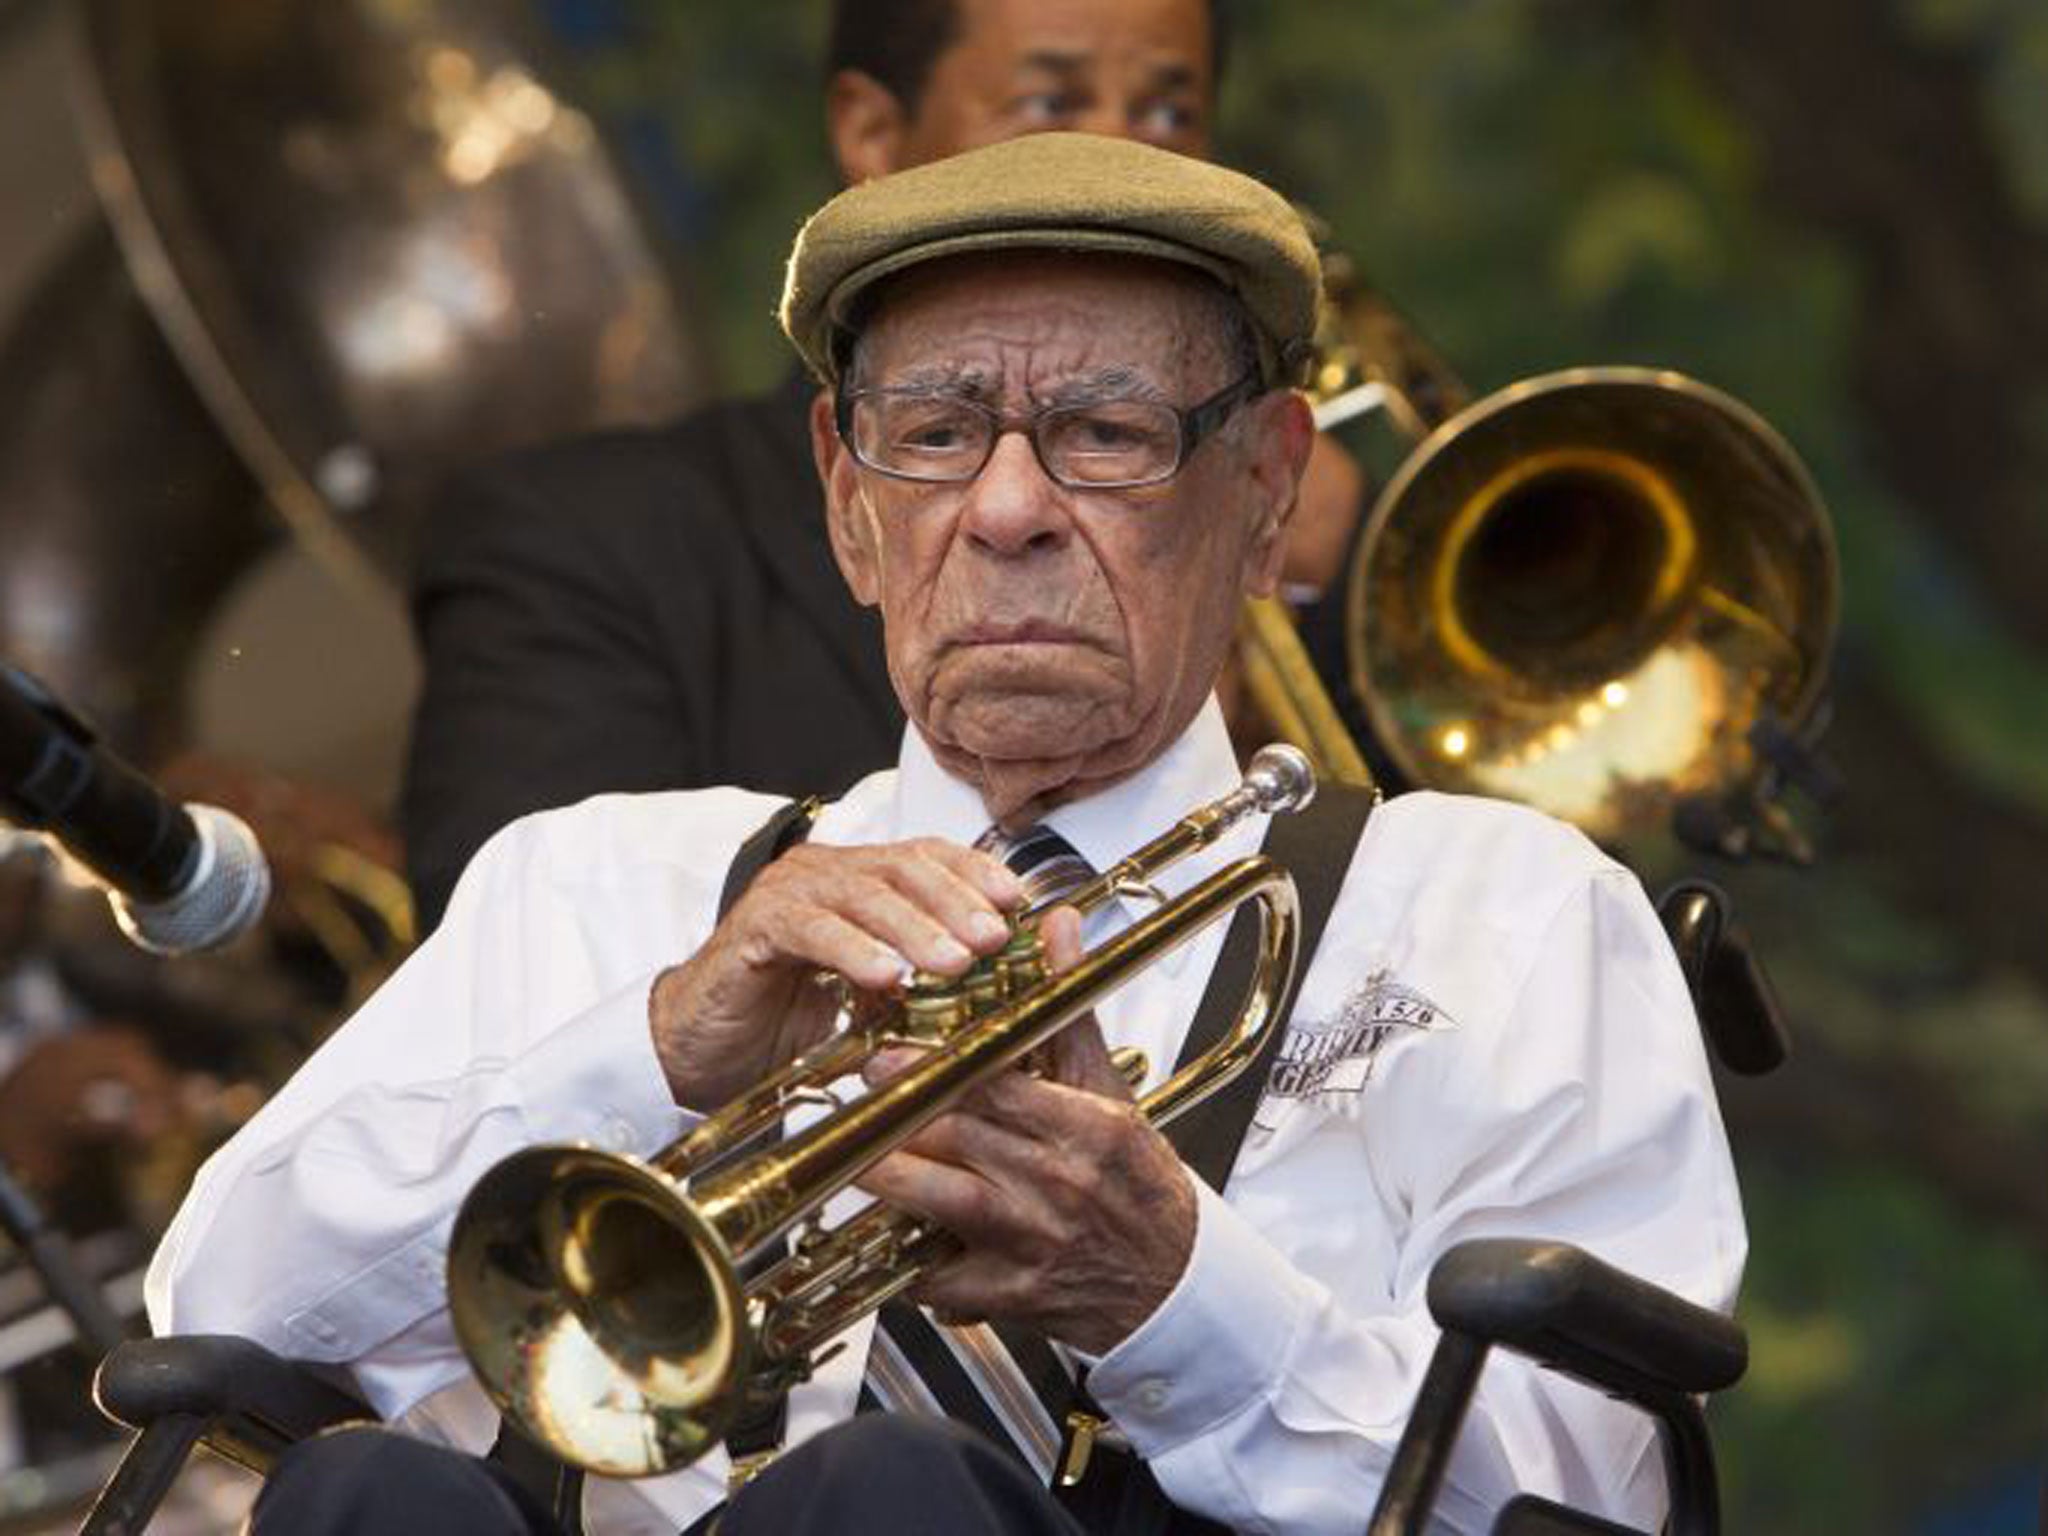 Ferbos performing at the age of 100 in New Orleans in 2012